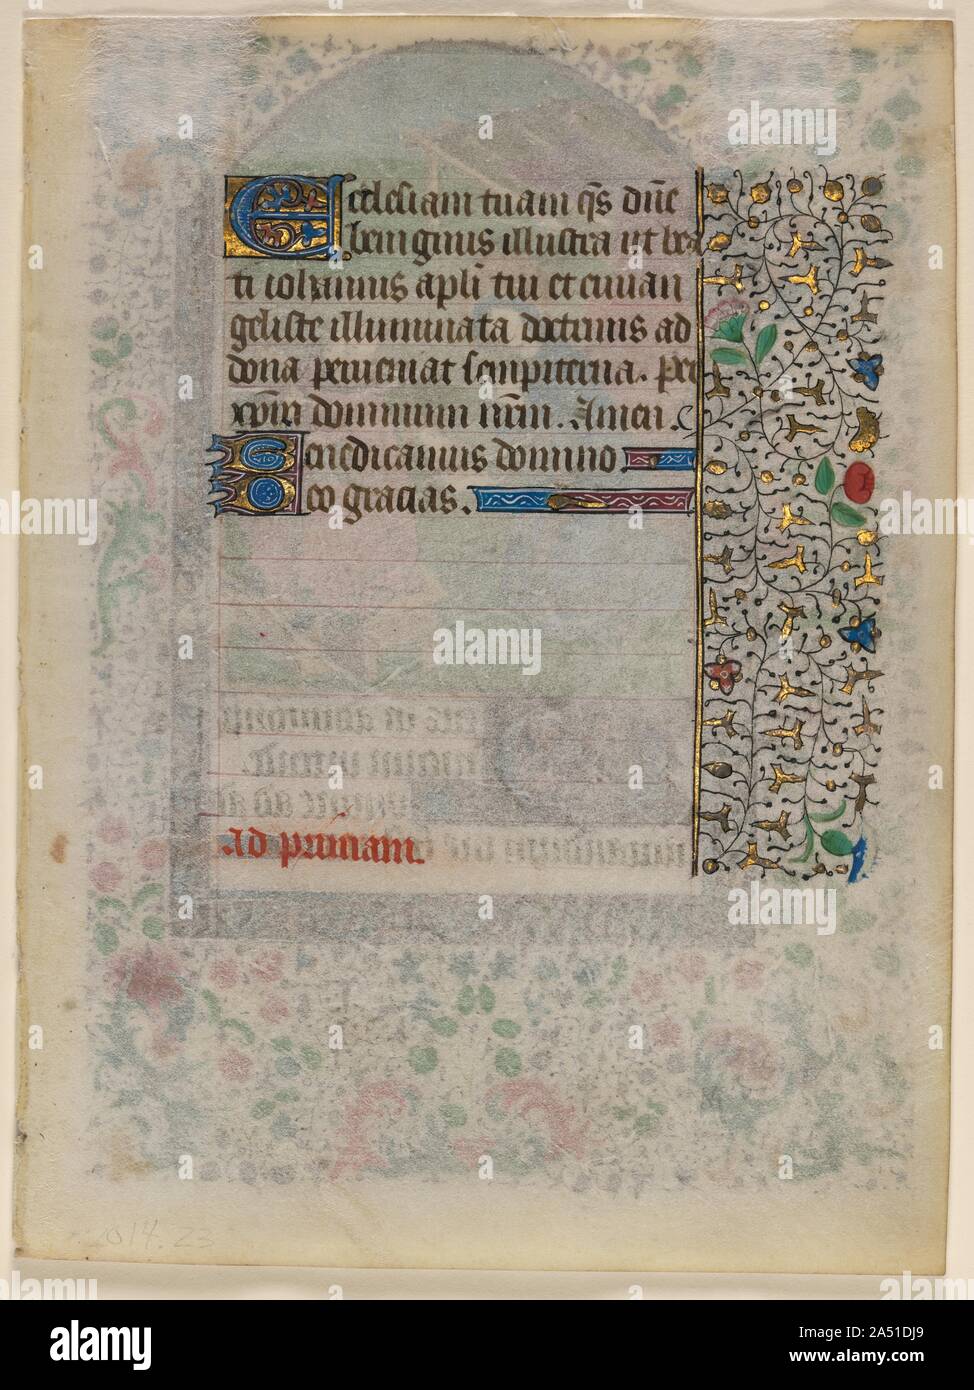 Leaf from a Book of Hours: Text (verso), c. 1430. Representing God's entry into the world, the Nativity remains one of medieval painting's most poignant Christian images. In the Gospels, only Matthew and Luke directly described this event. Perhaps the brevity and absence of detail in these texts allowed artists to devote so much creativity to amplifying the Christmas story. This miniature's simplicity makes it compelling. Only the three principals&#x2014;Mary, Joseph, and the newly born Christ Child&#x2014;appear in the scene. The Virgin kneels before an elegant canopied bed made sumptuous by Stock Photo